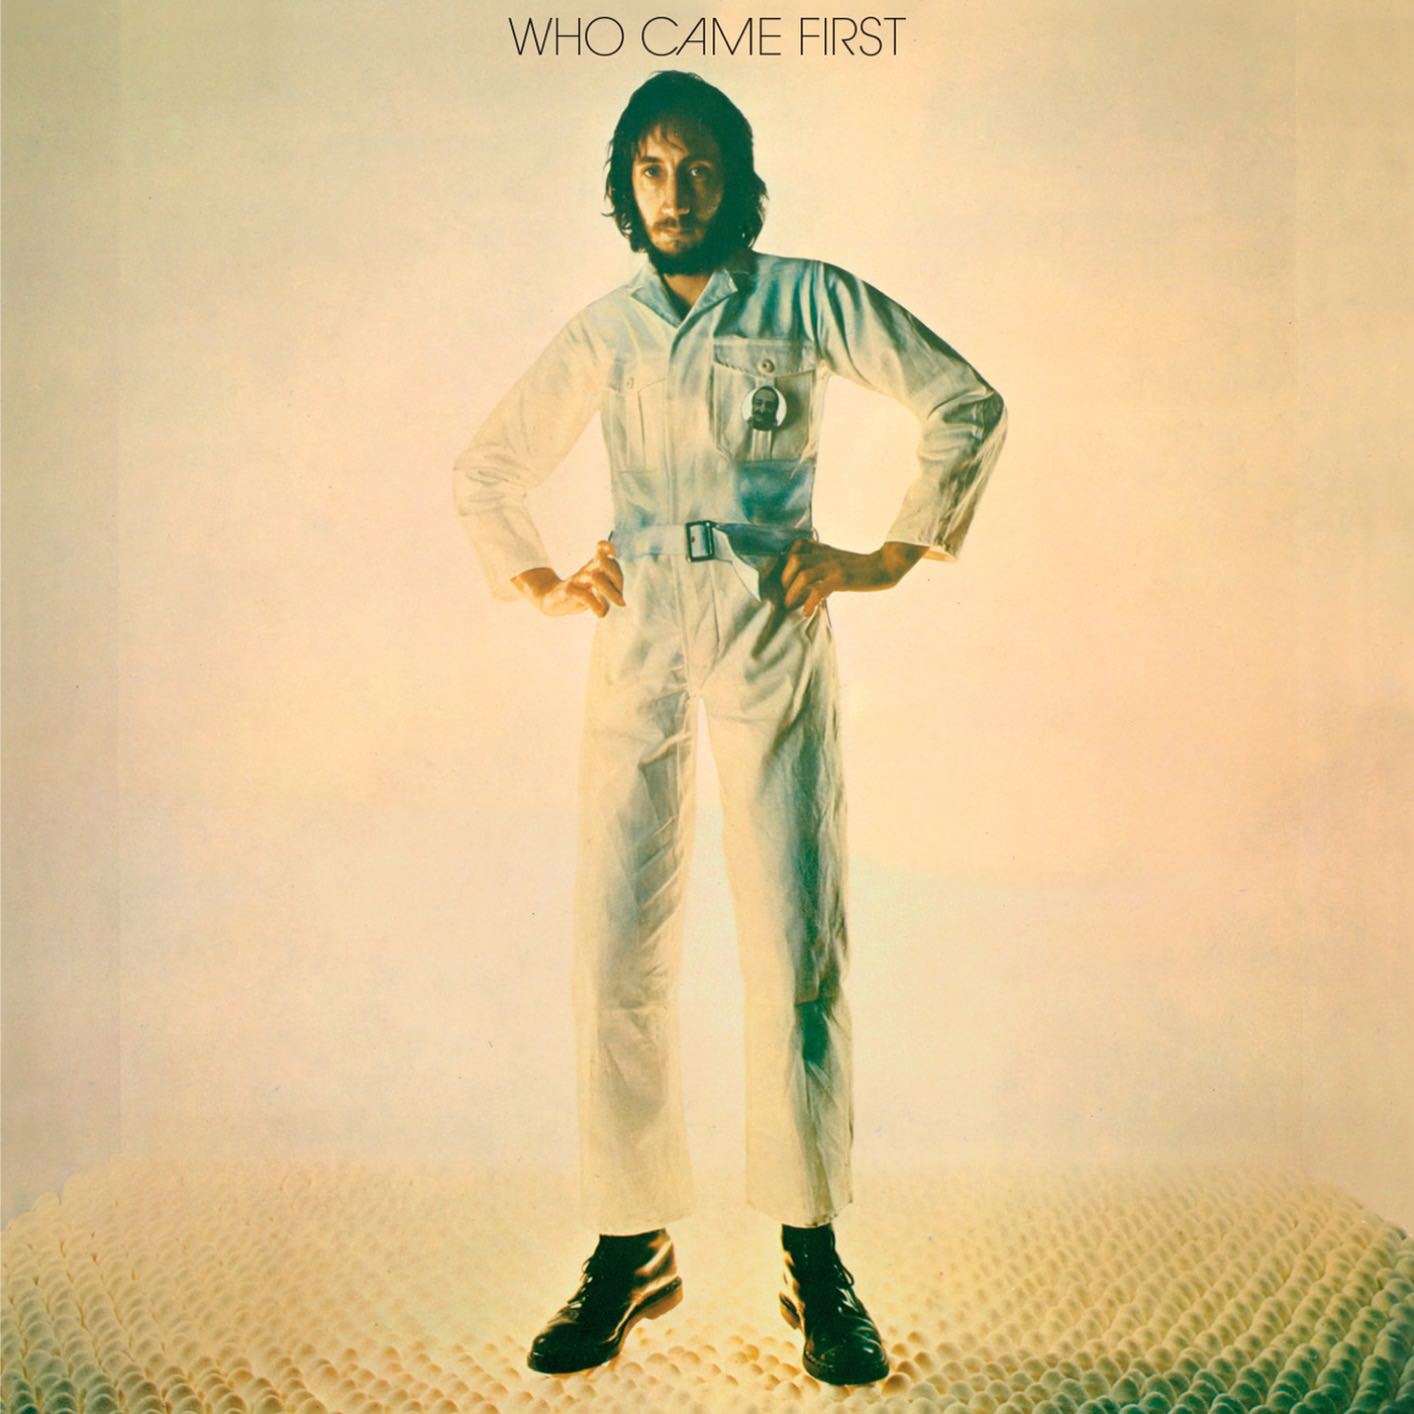 Pete Townshend - Who Came First (Deluxe) (1972/2018) [FLAC 24bit/96kHz]